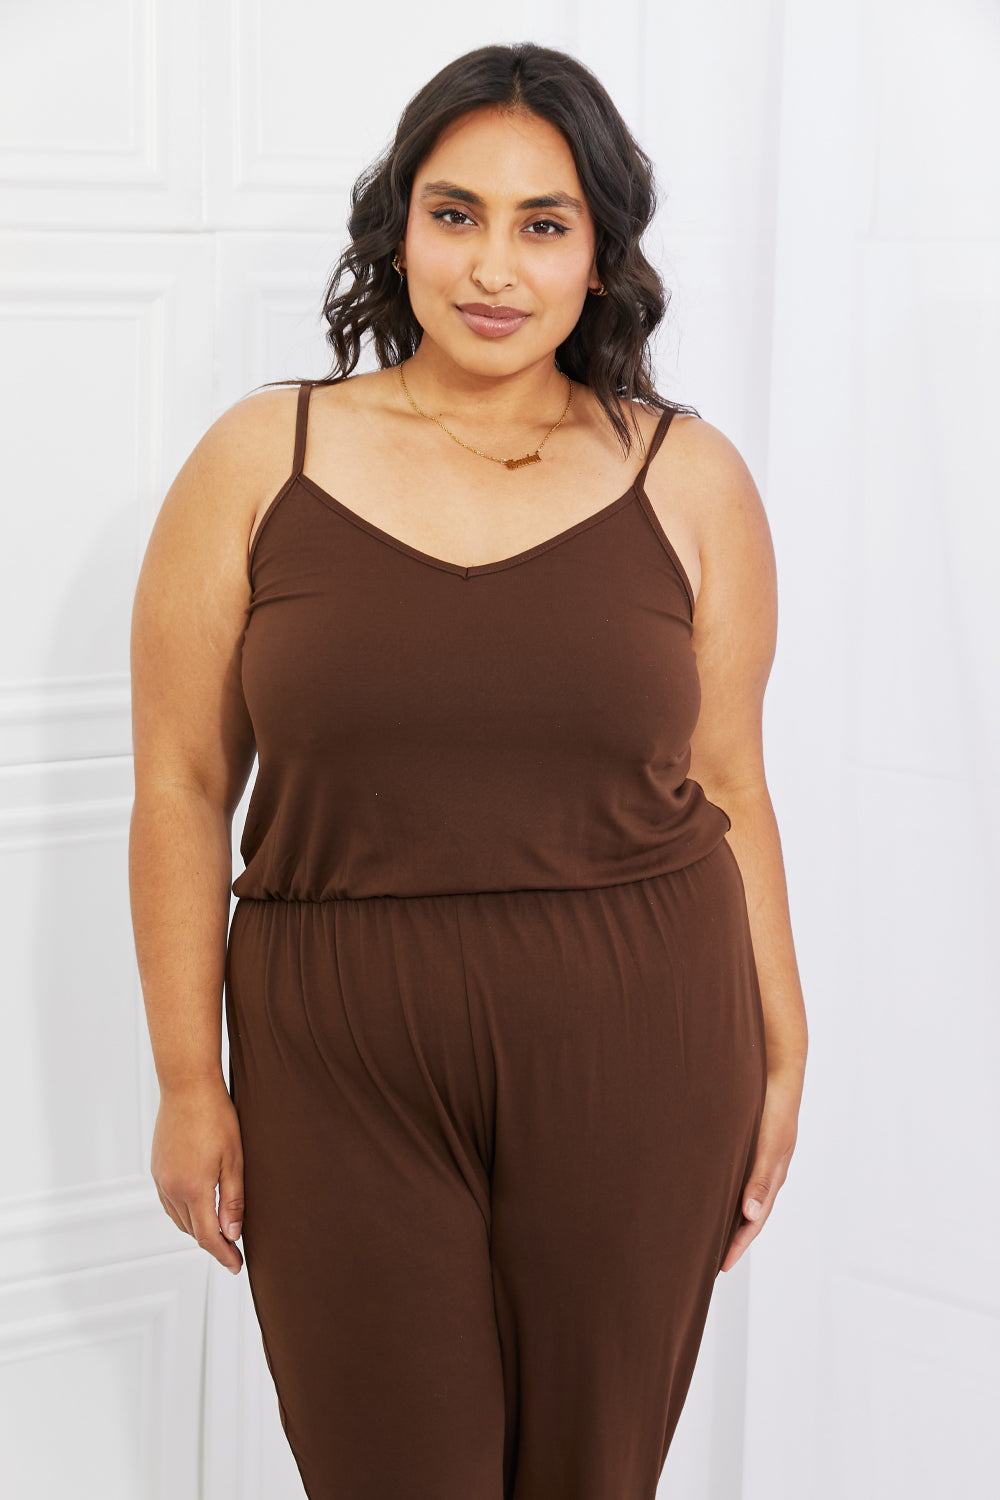 Capella Comfy Casual Full Size Solid Elastic Waistband Jumpsuit in Chocolate free shipping -Oh Em Gee Boutique